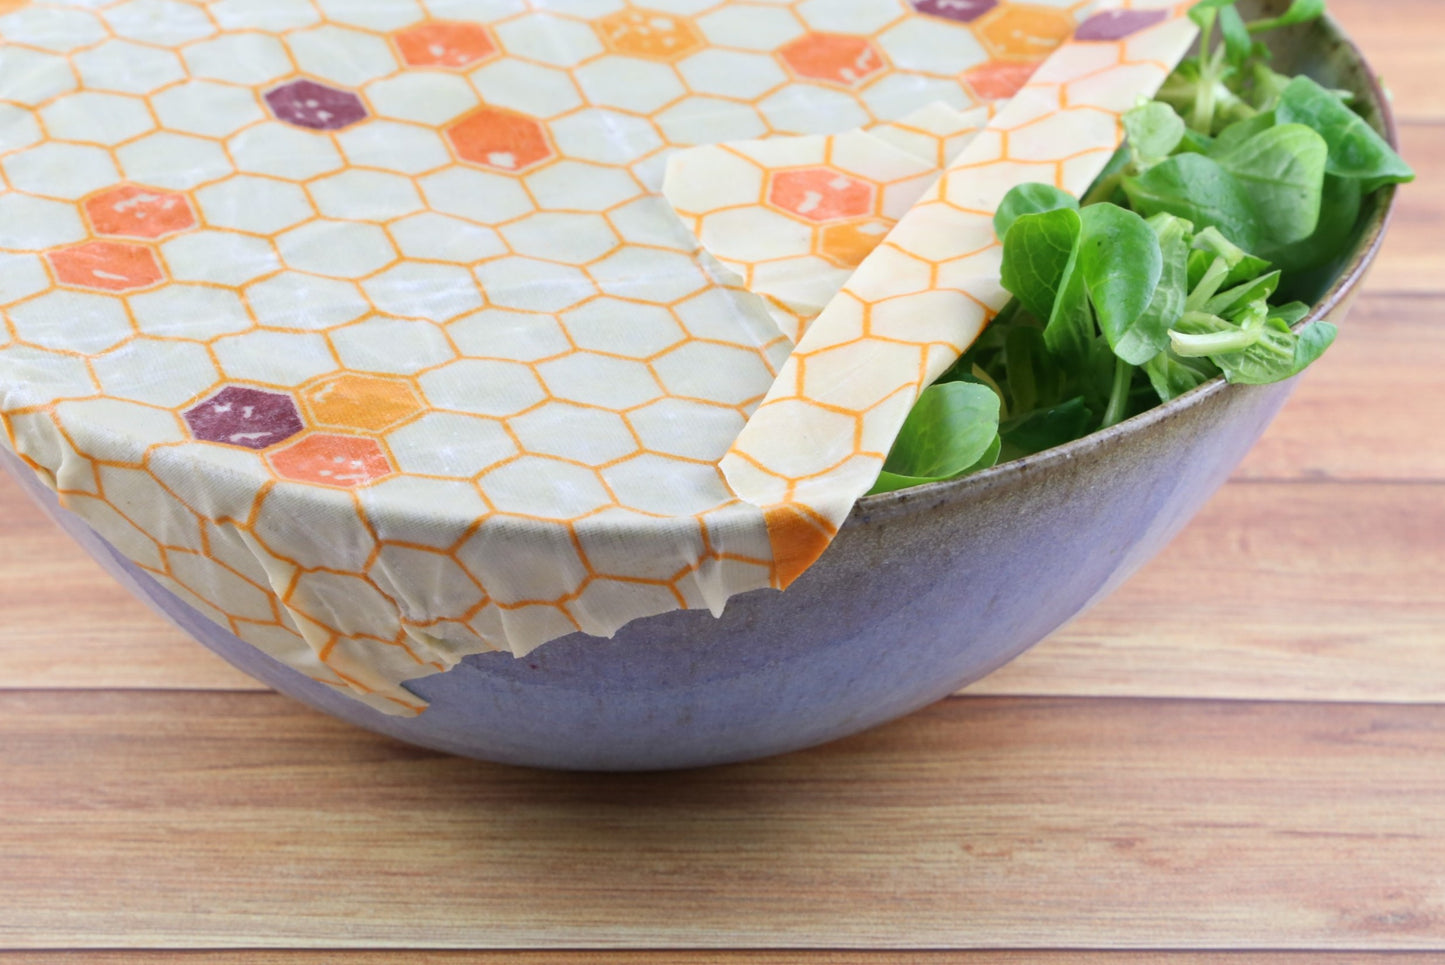 zero waste beeswax food wrap hive pattern from beewise amsterdam being used a food container with salad at the table